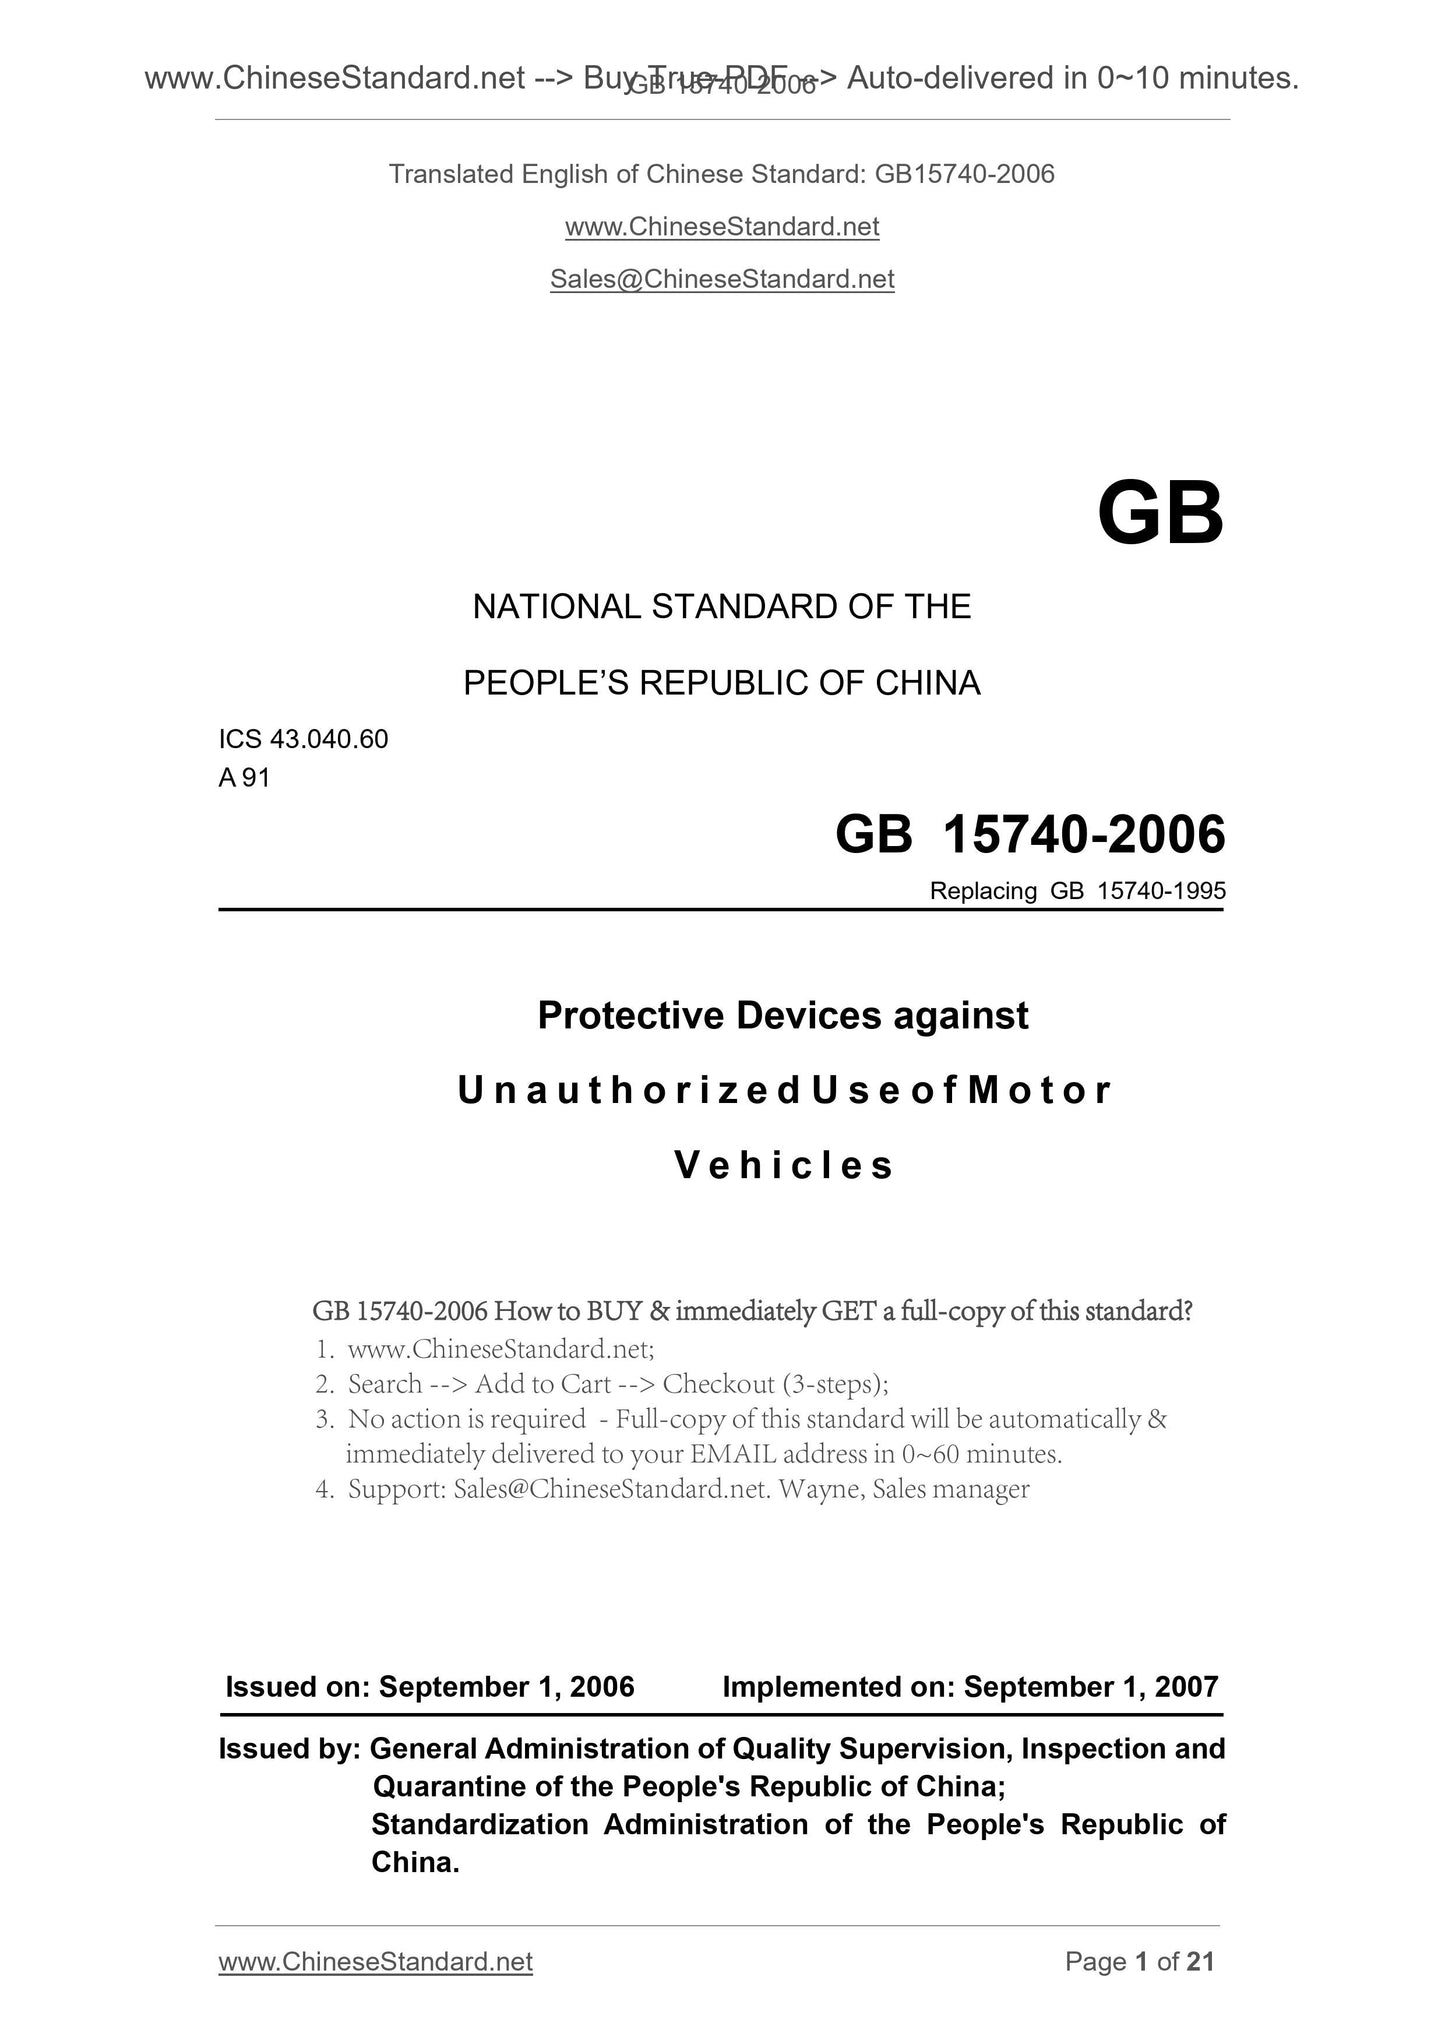 GB 15740-2006 Page 1